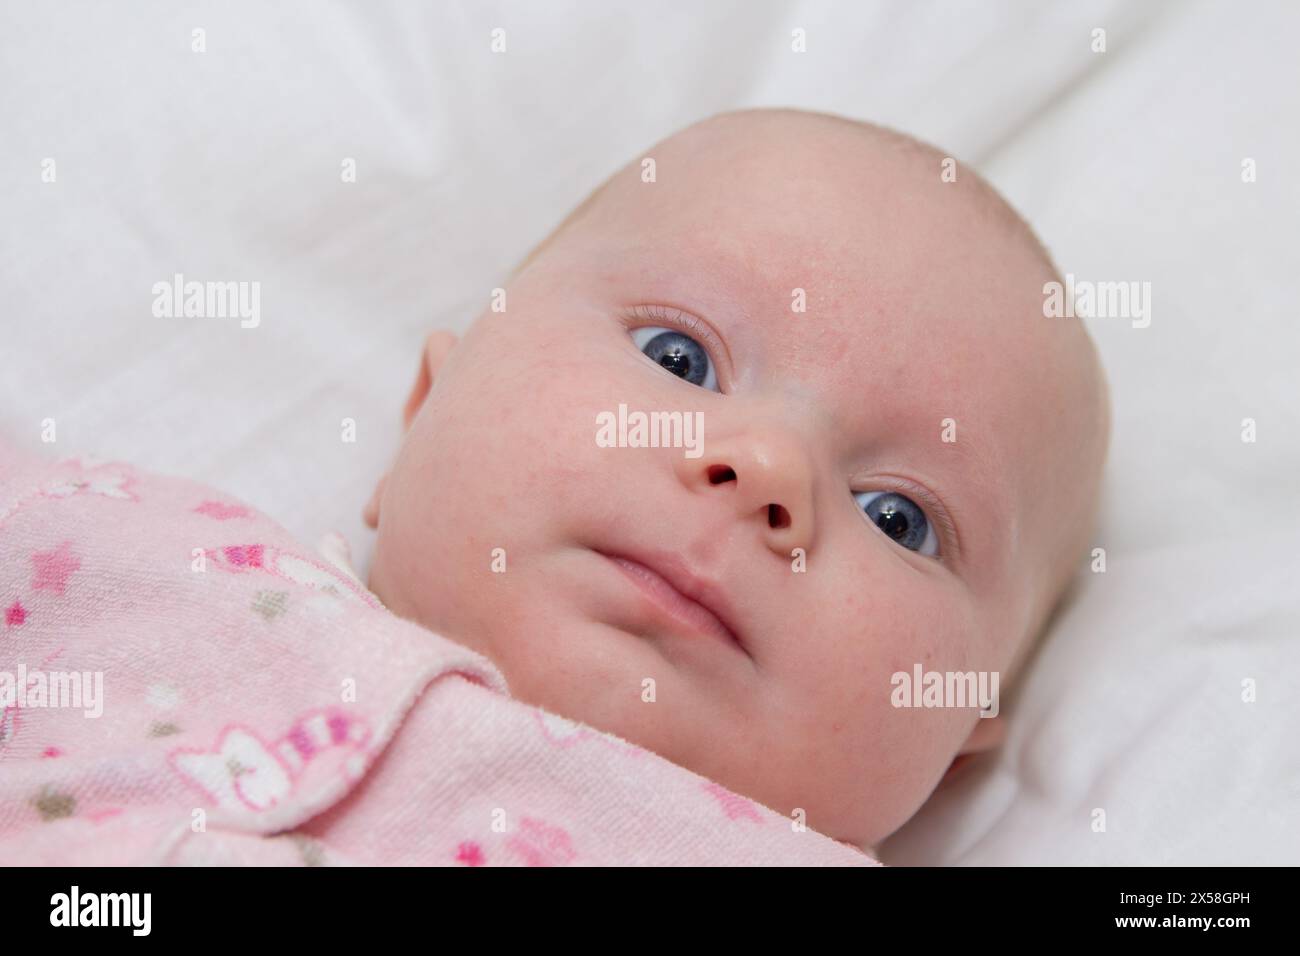 beautiful newborn baby girl with blue eyes with round face Stock Photo